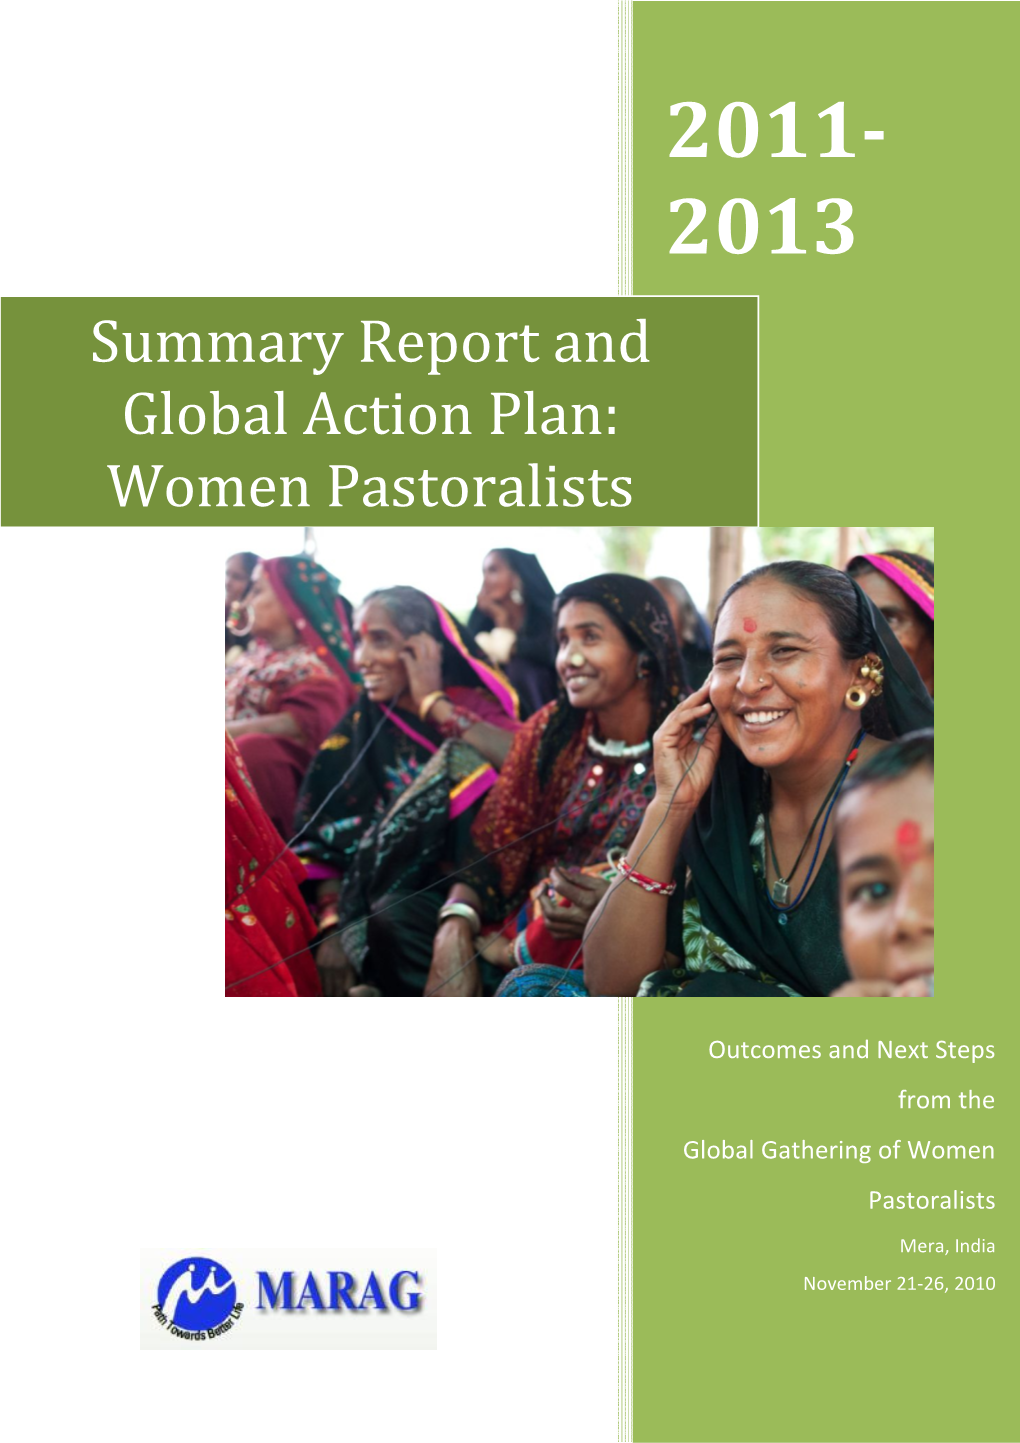 Summary Report and Global Action Plan: Women Pastoralists